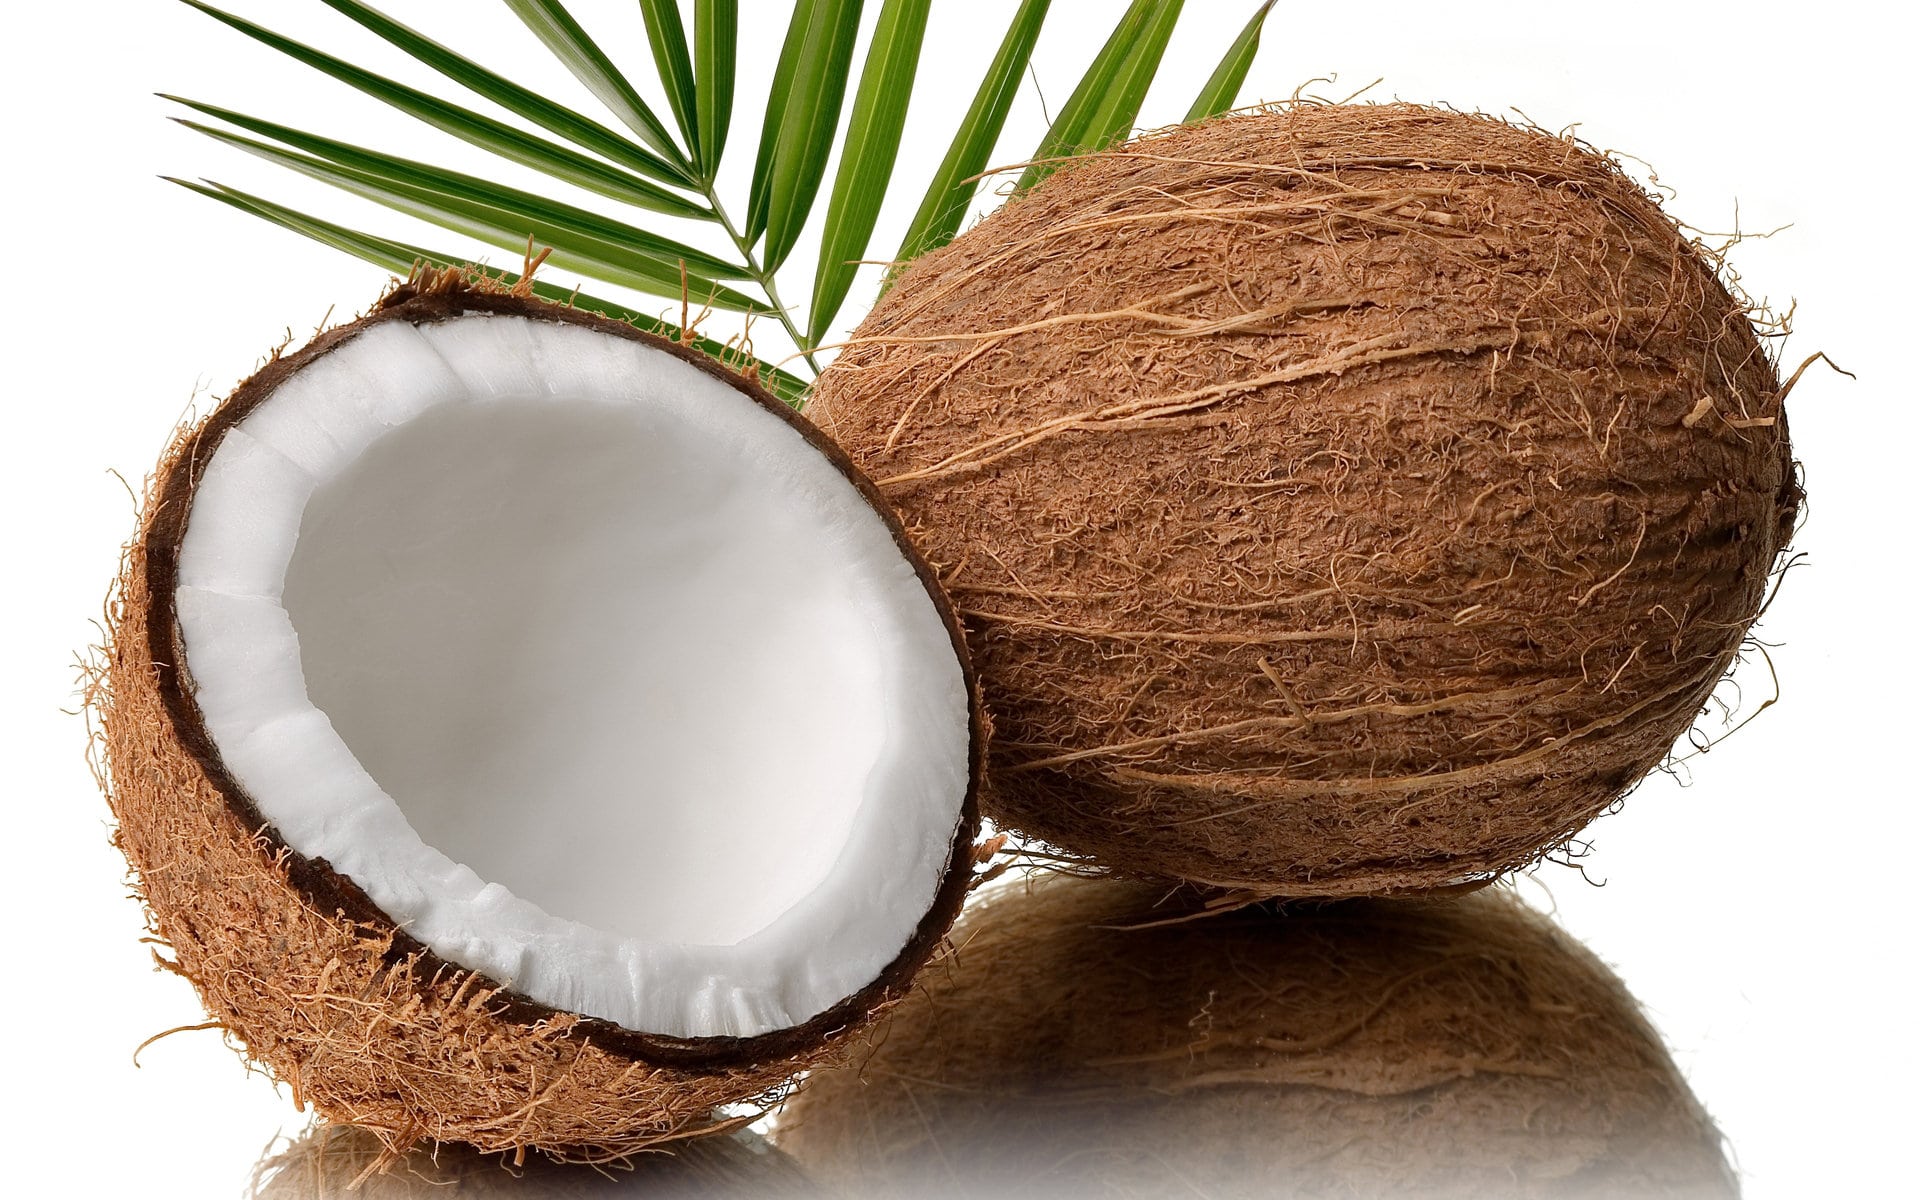 coconut wallpaper,coconut,coconut water,plant,palm tree,arecales